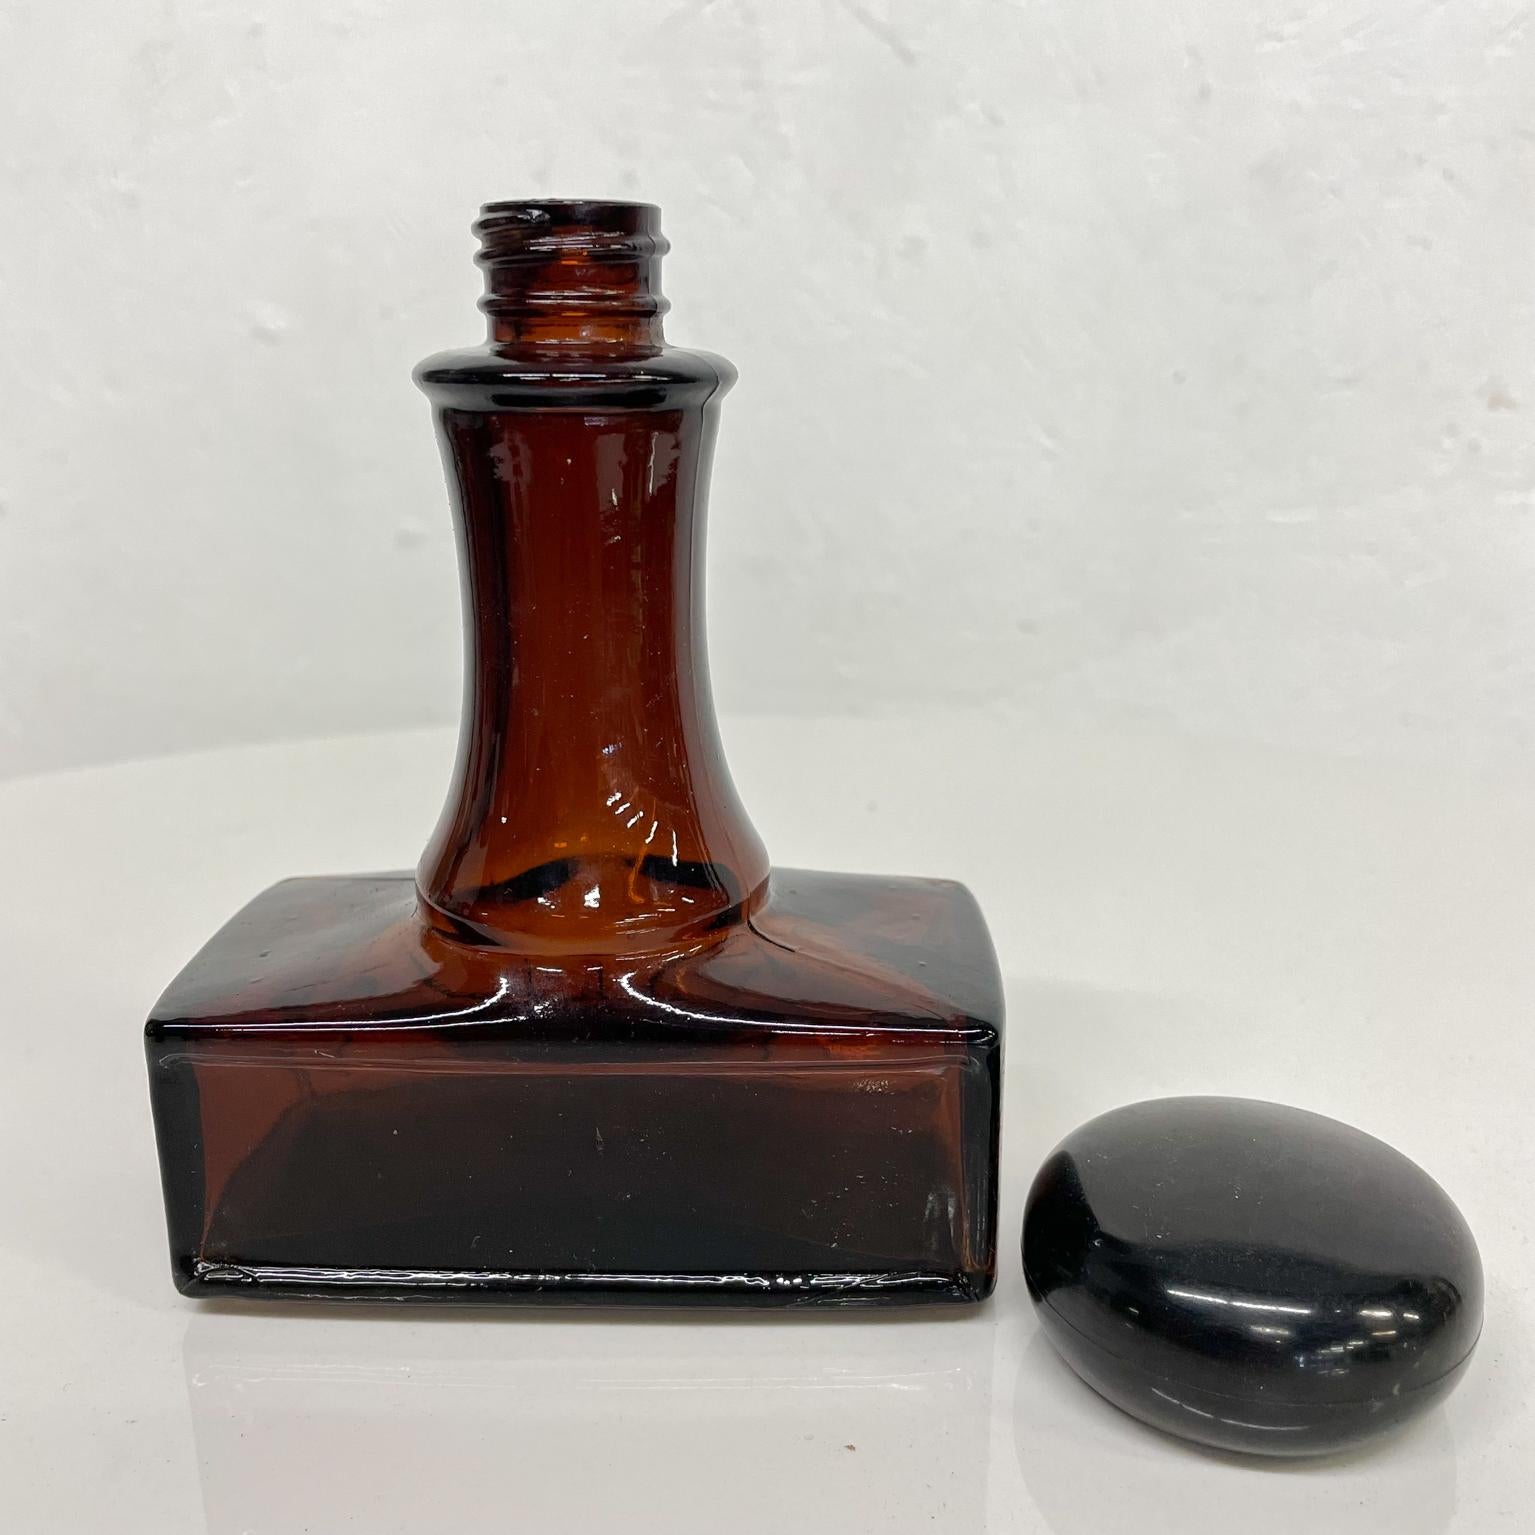 American 1970s Vintage Avon Stylish Paid Stamp Glass Perfume Cologne Decanter Bottle